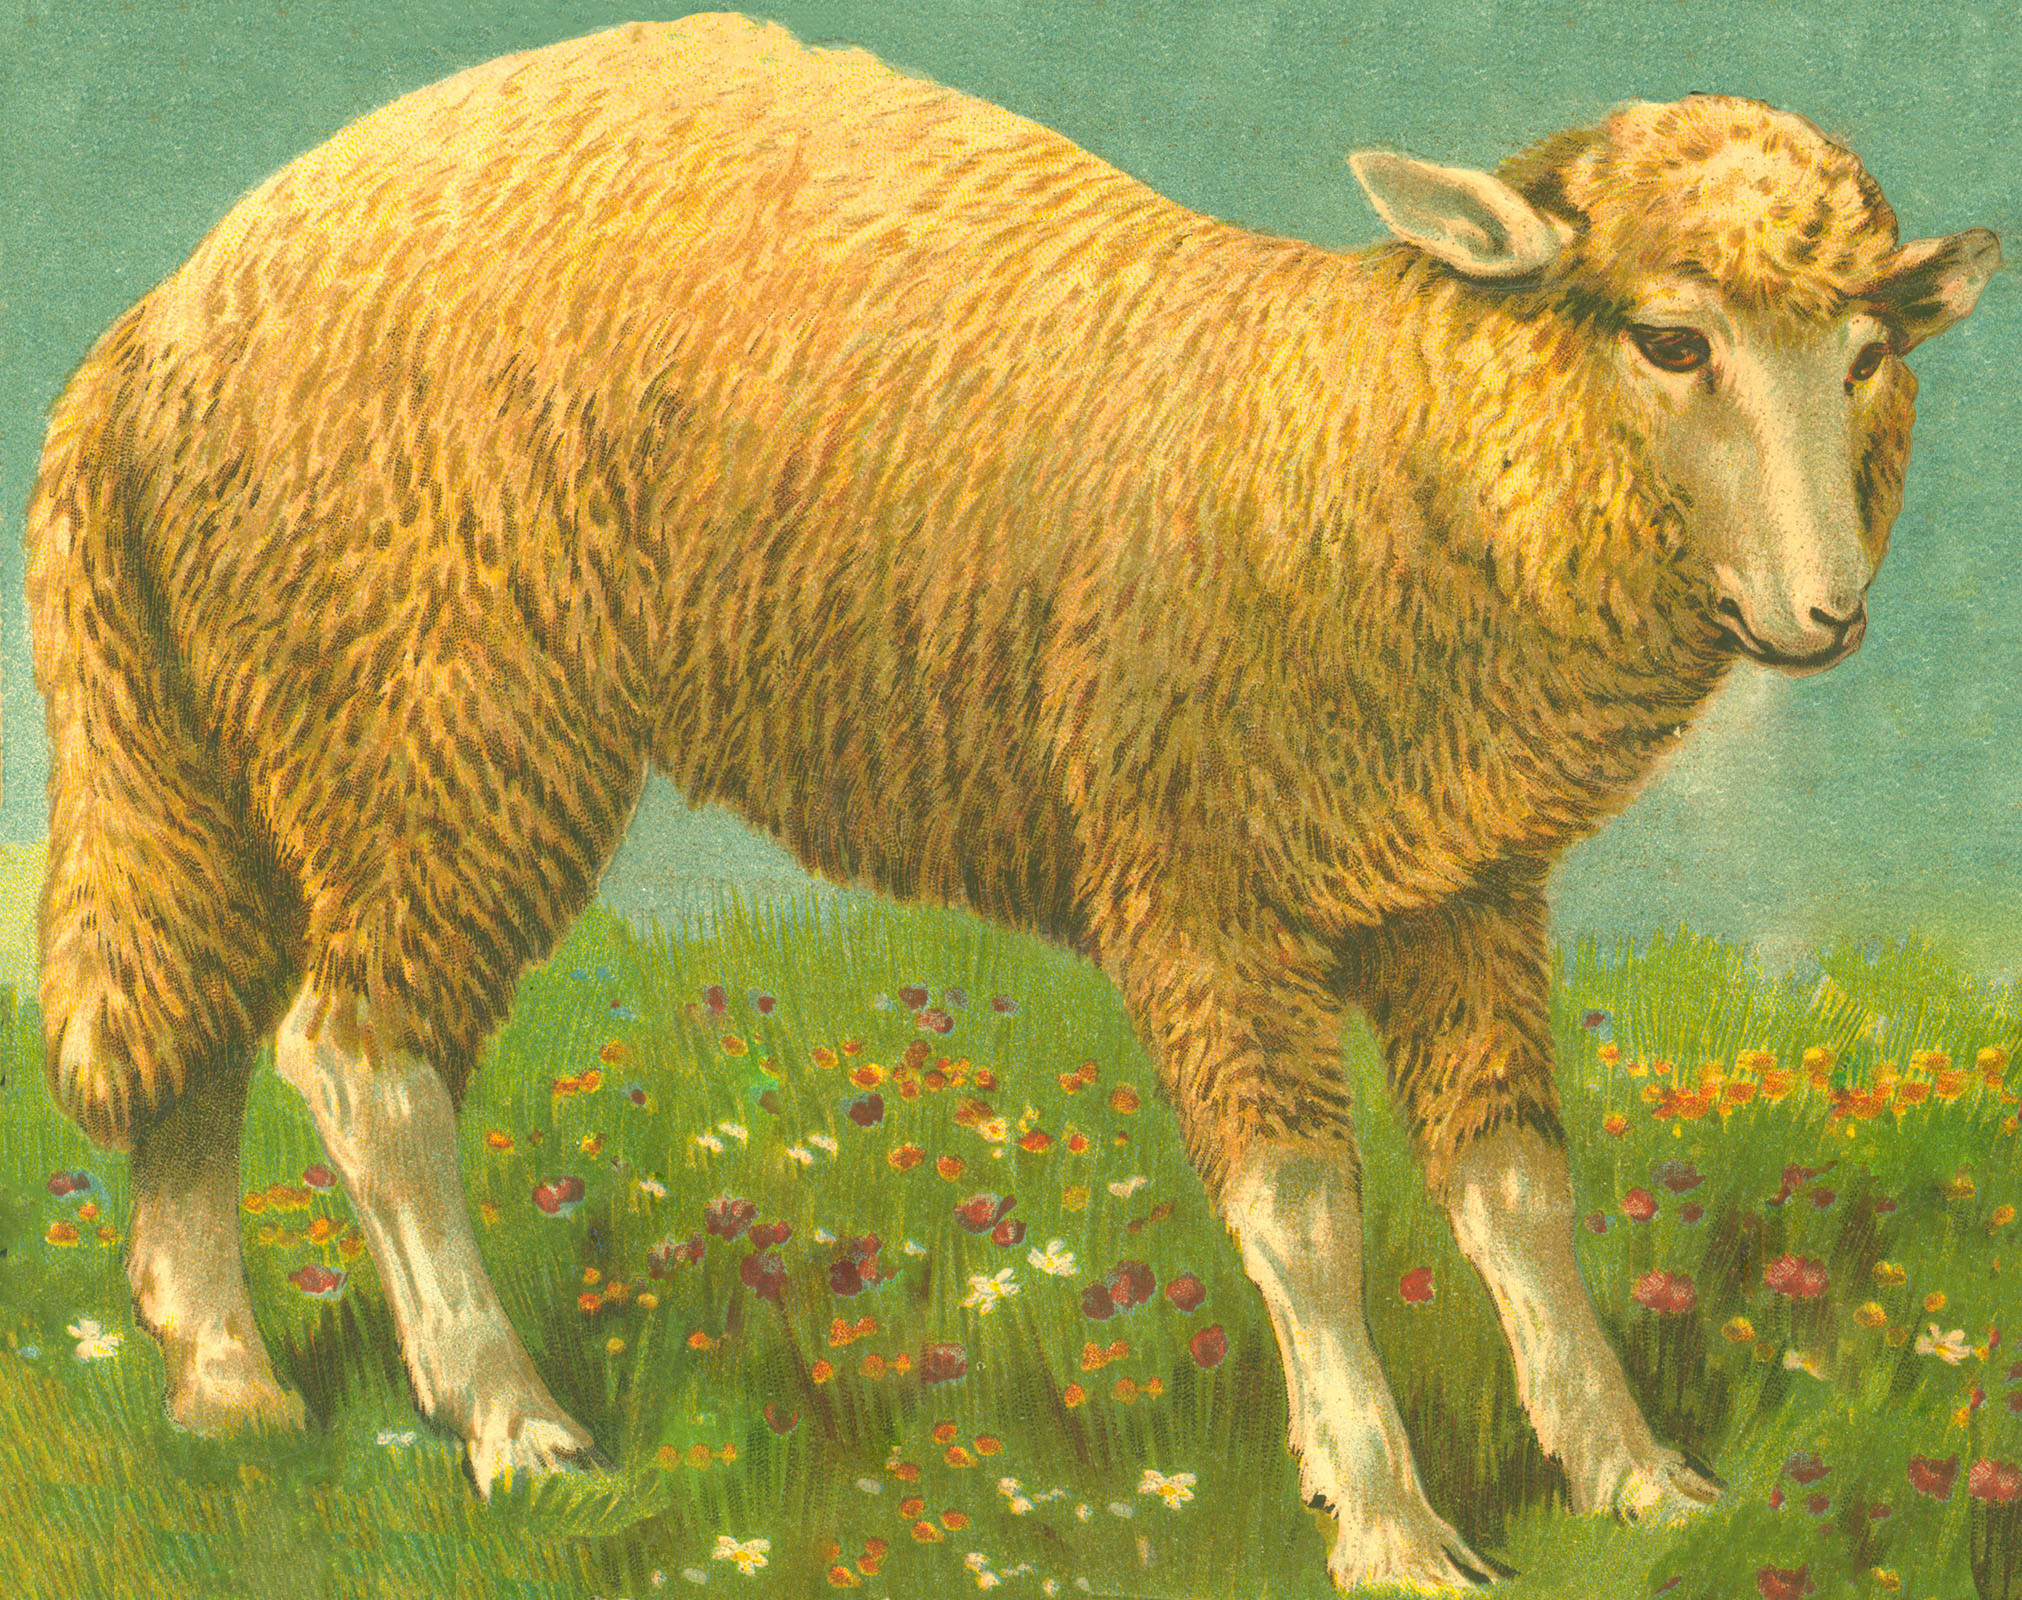 Sheep Illustration in Meadow